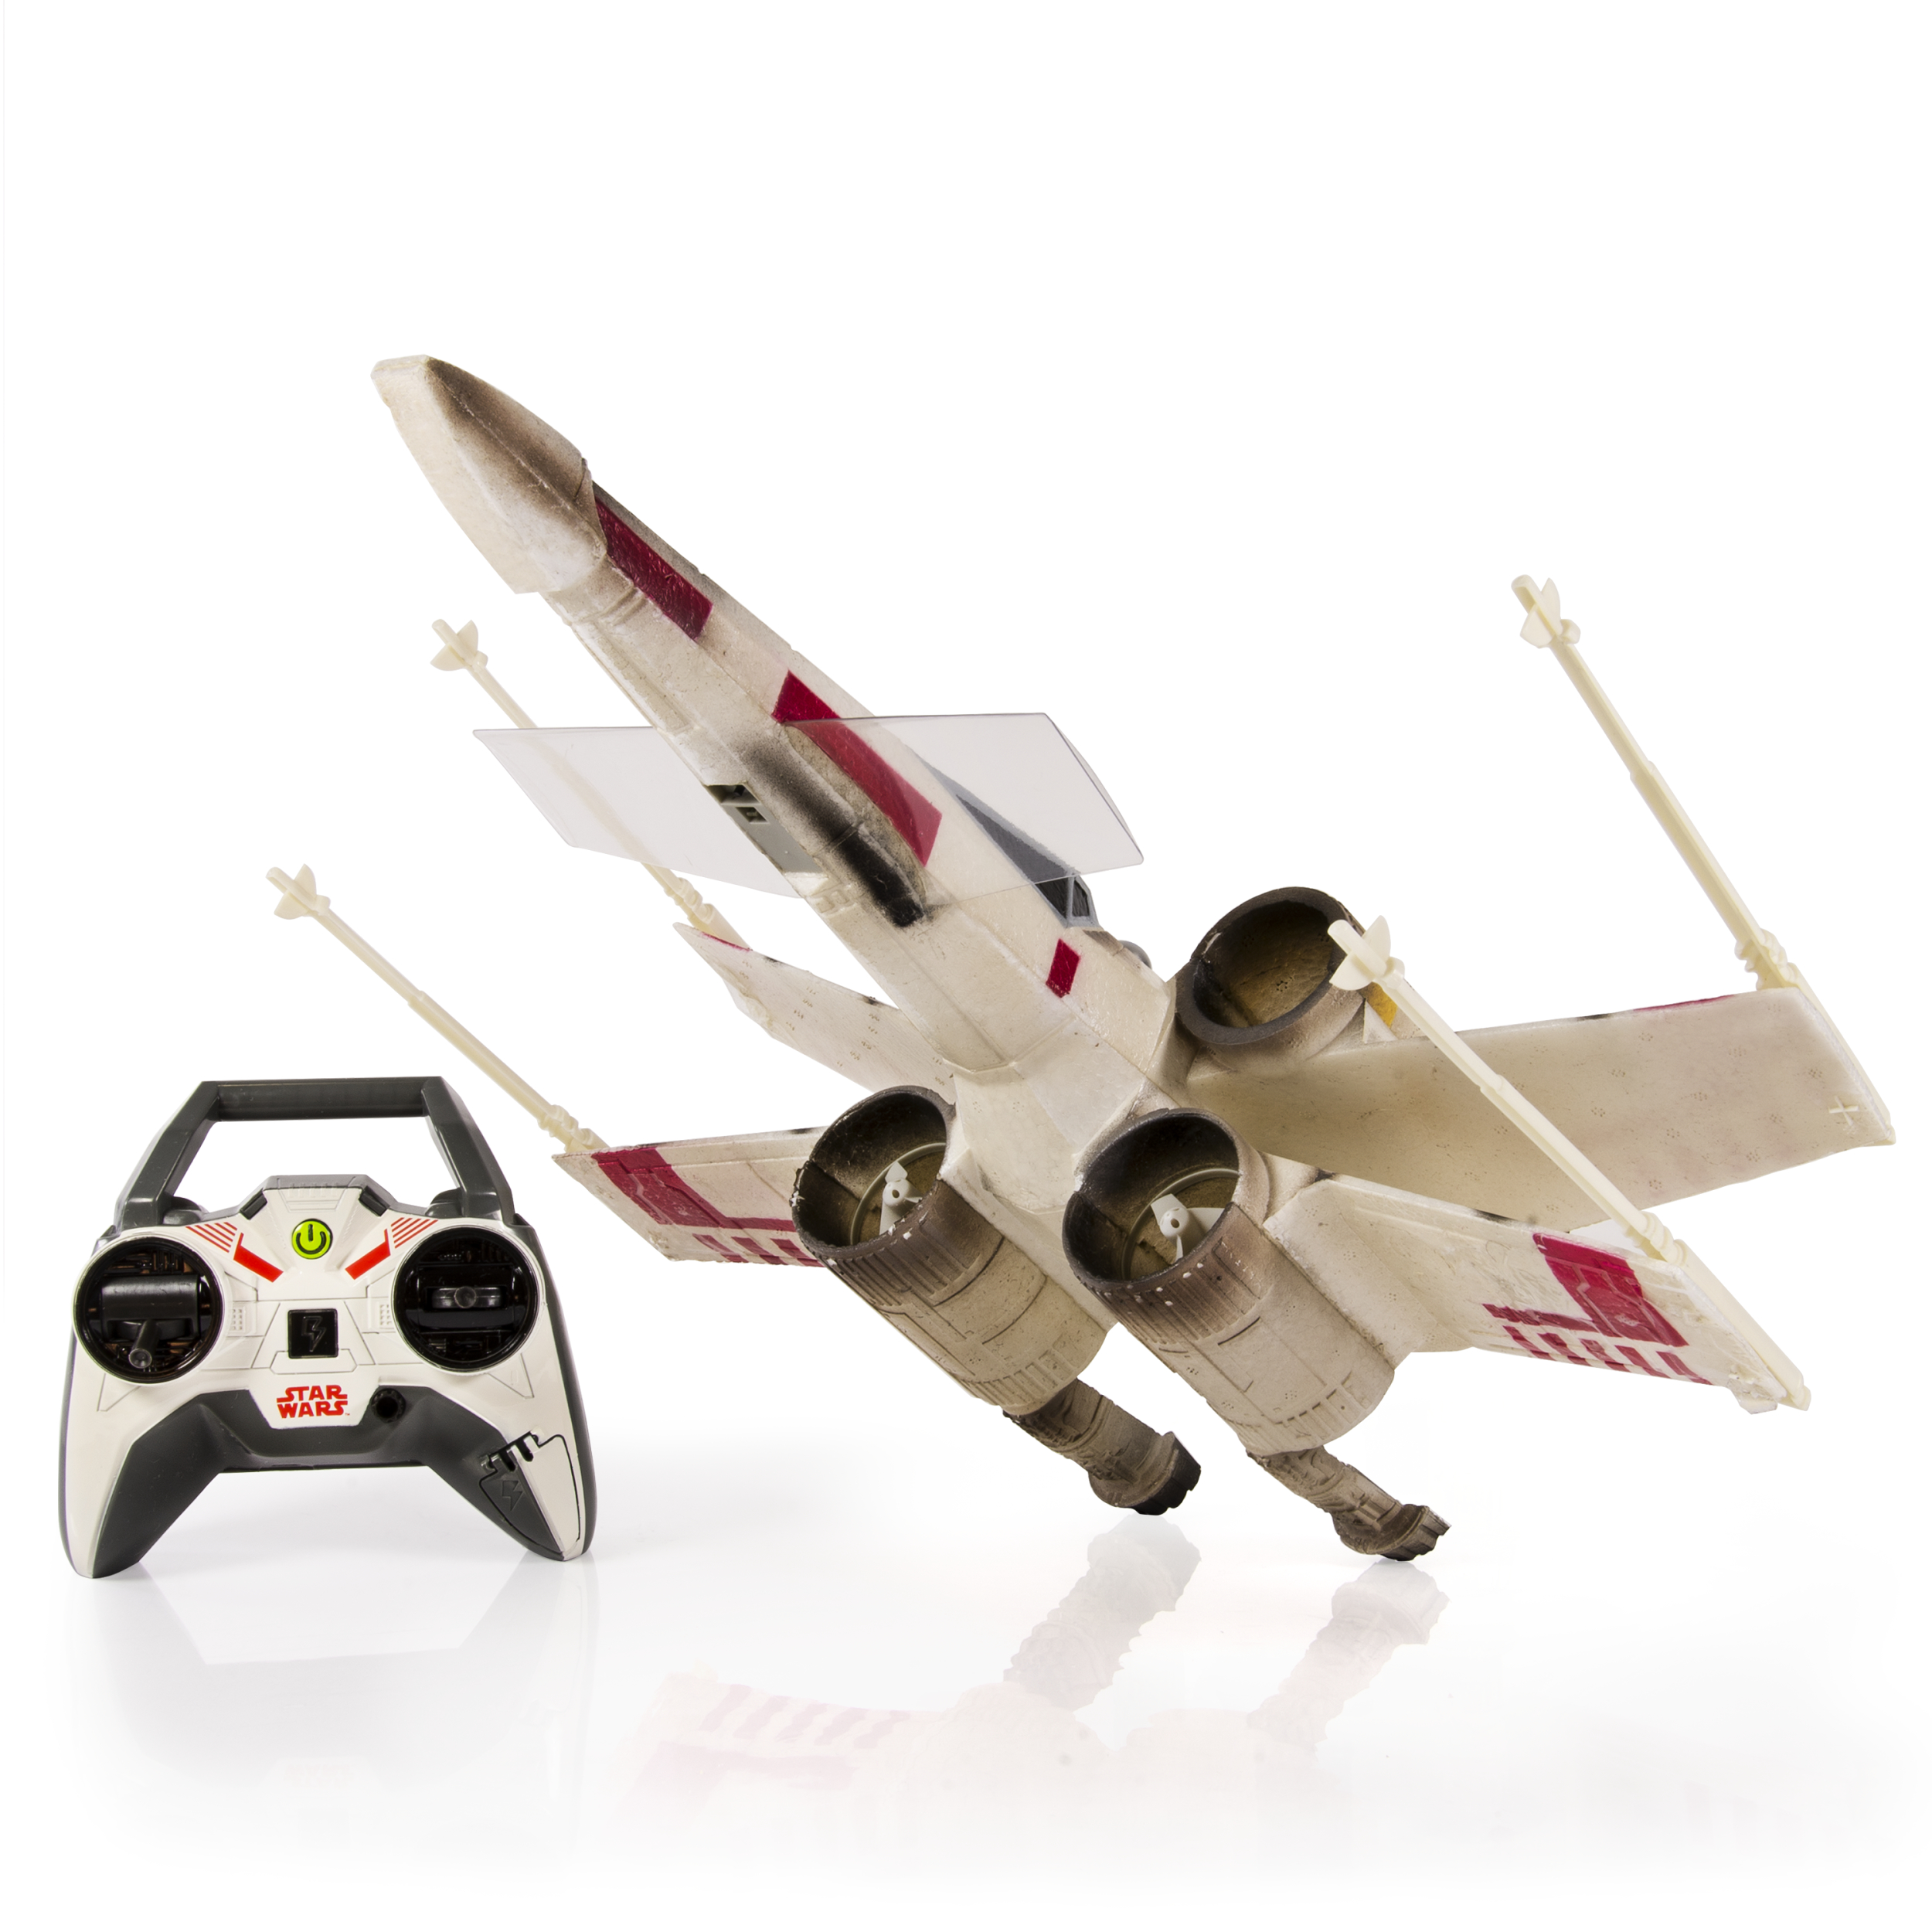 Air Hogs Star Wars Remote Control X-Wing Starfighter - image 1 of 6